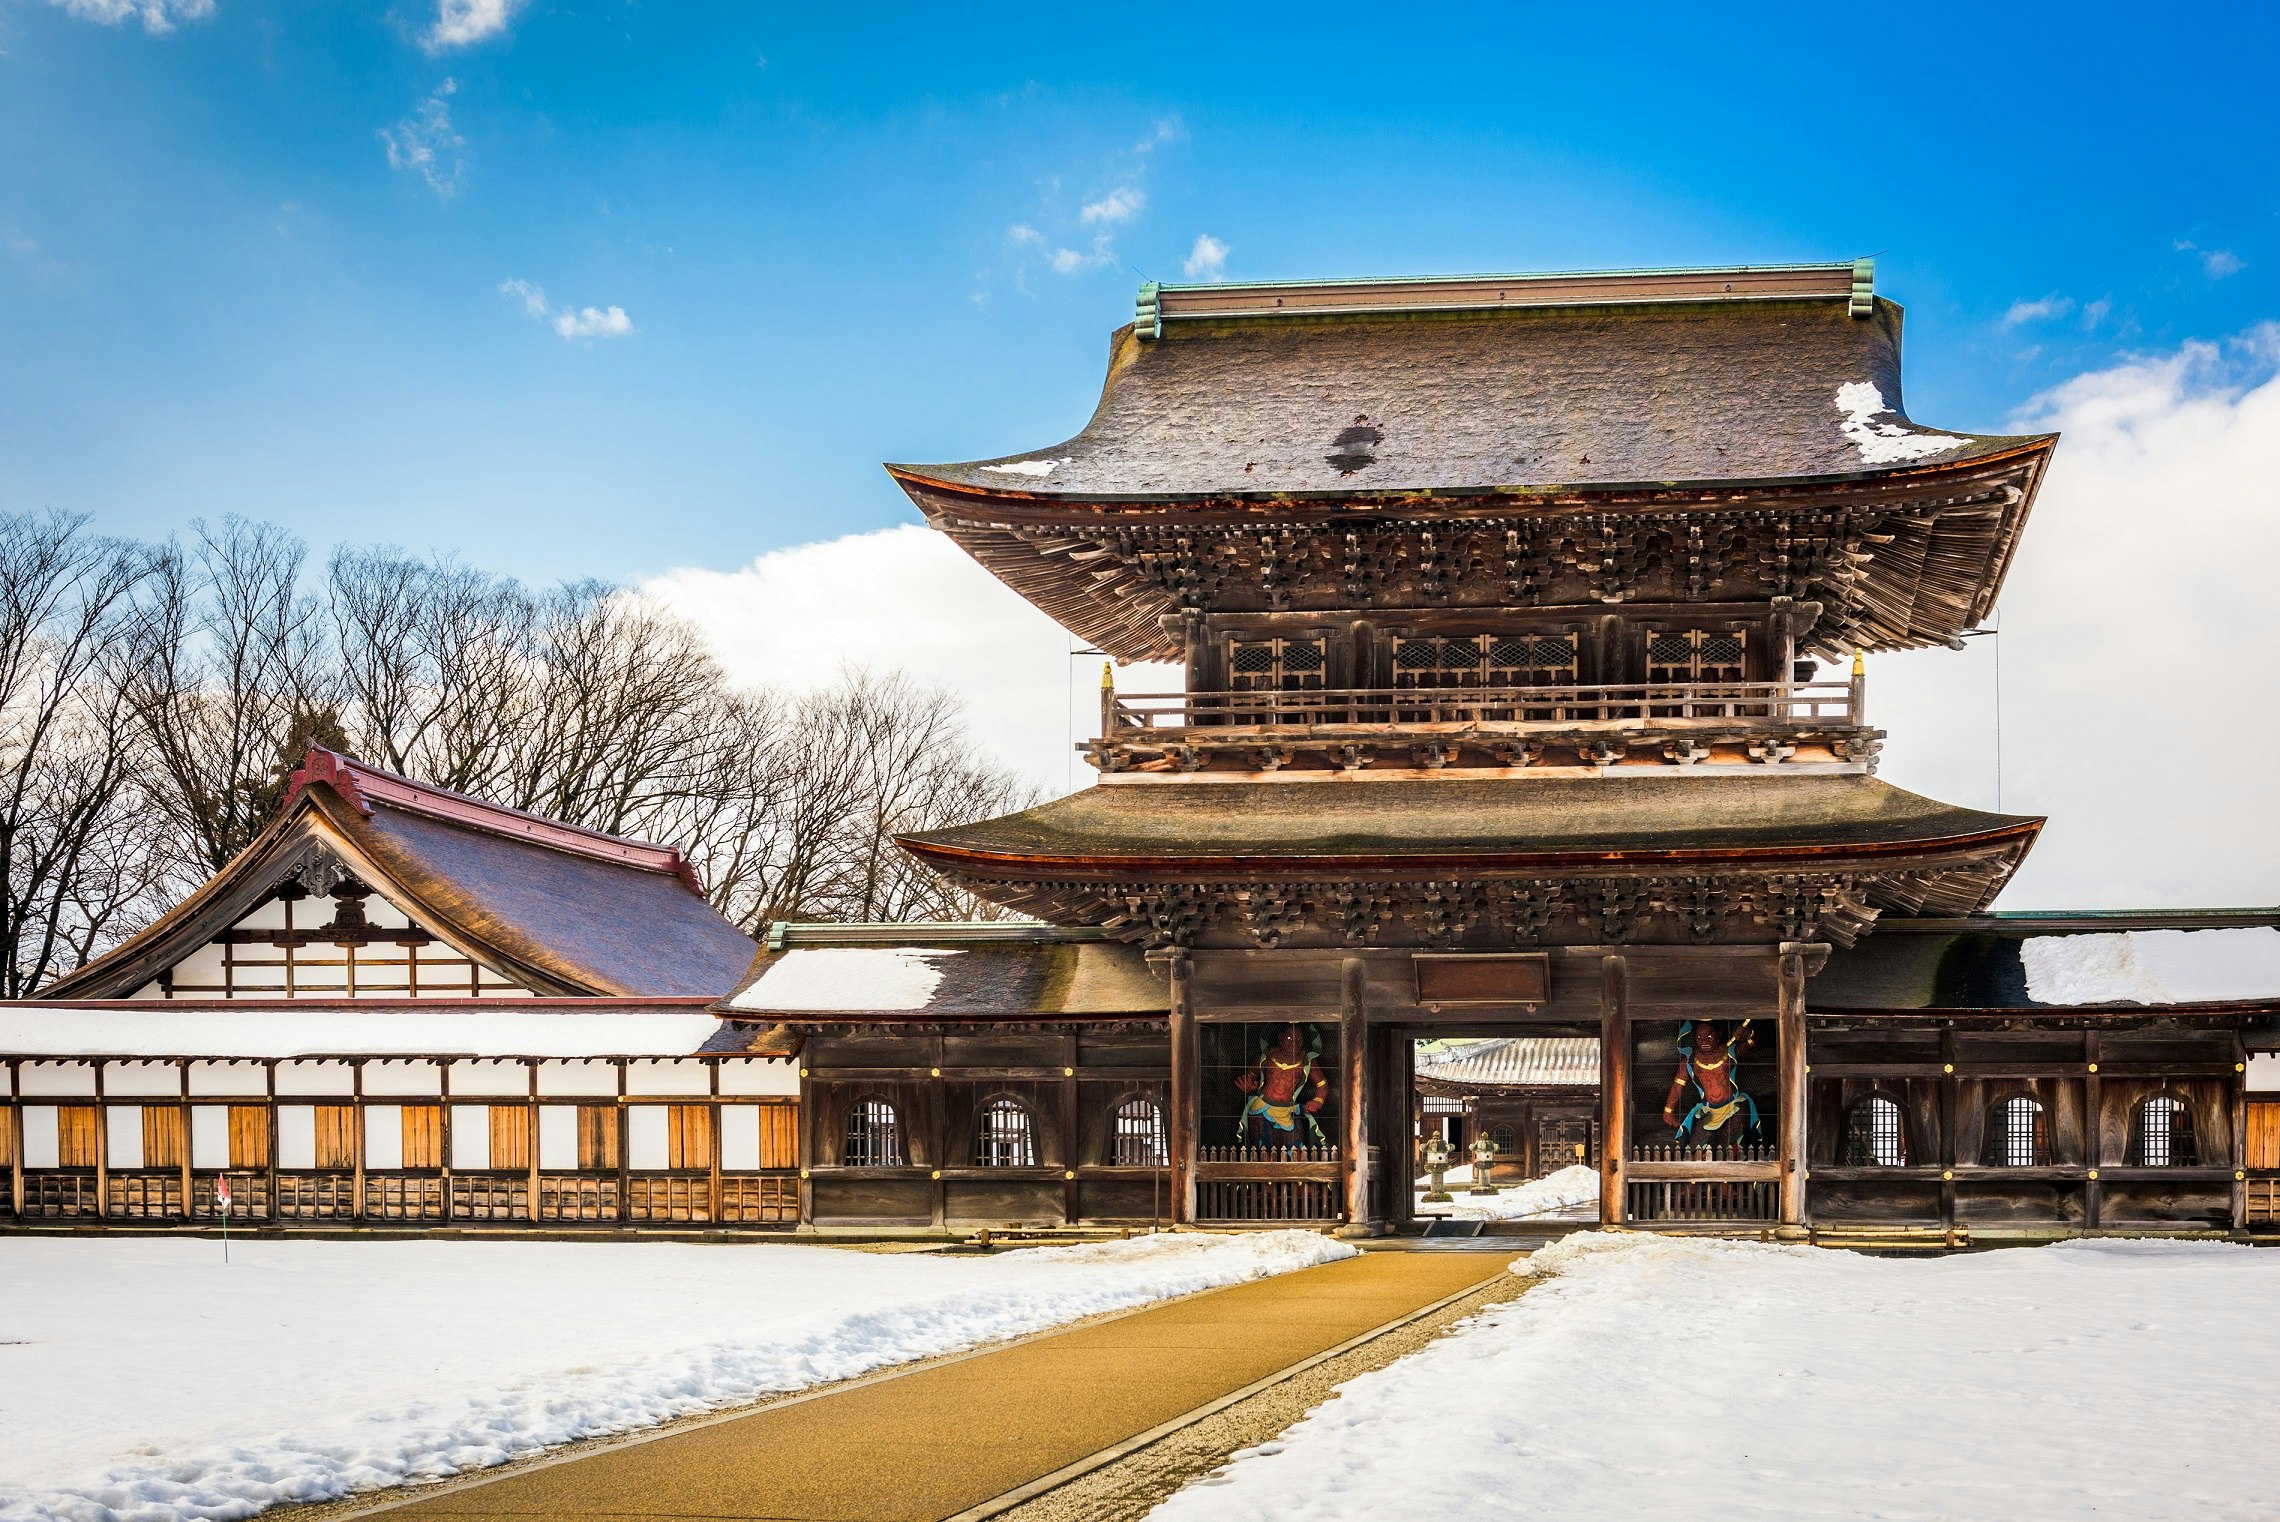 A tall and large wooden temple, with a traditional Japanese slanting roof. The ground around the temple is covered in snow.